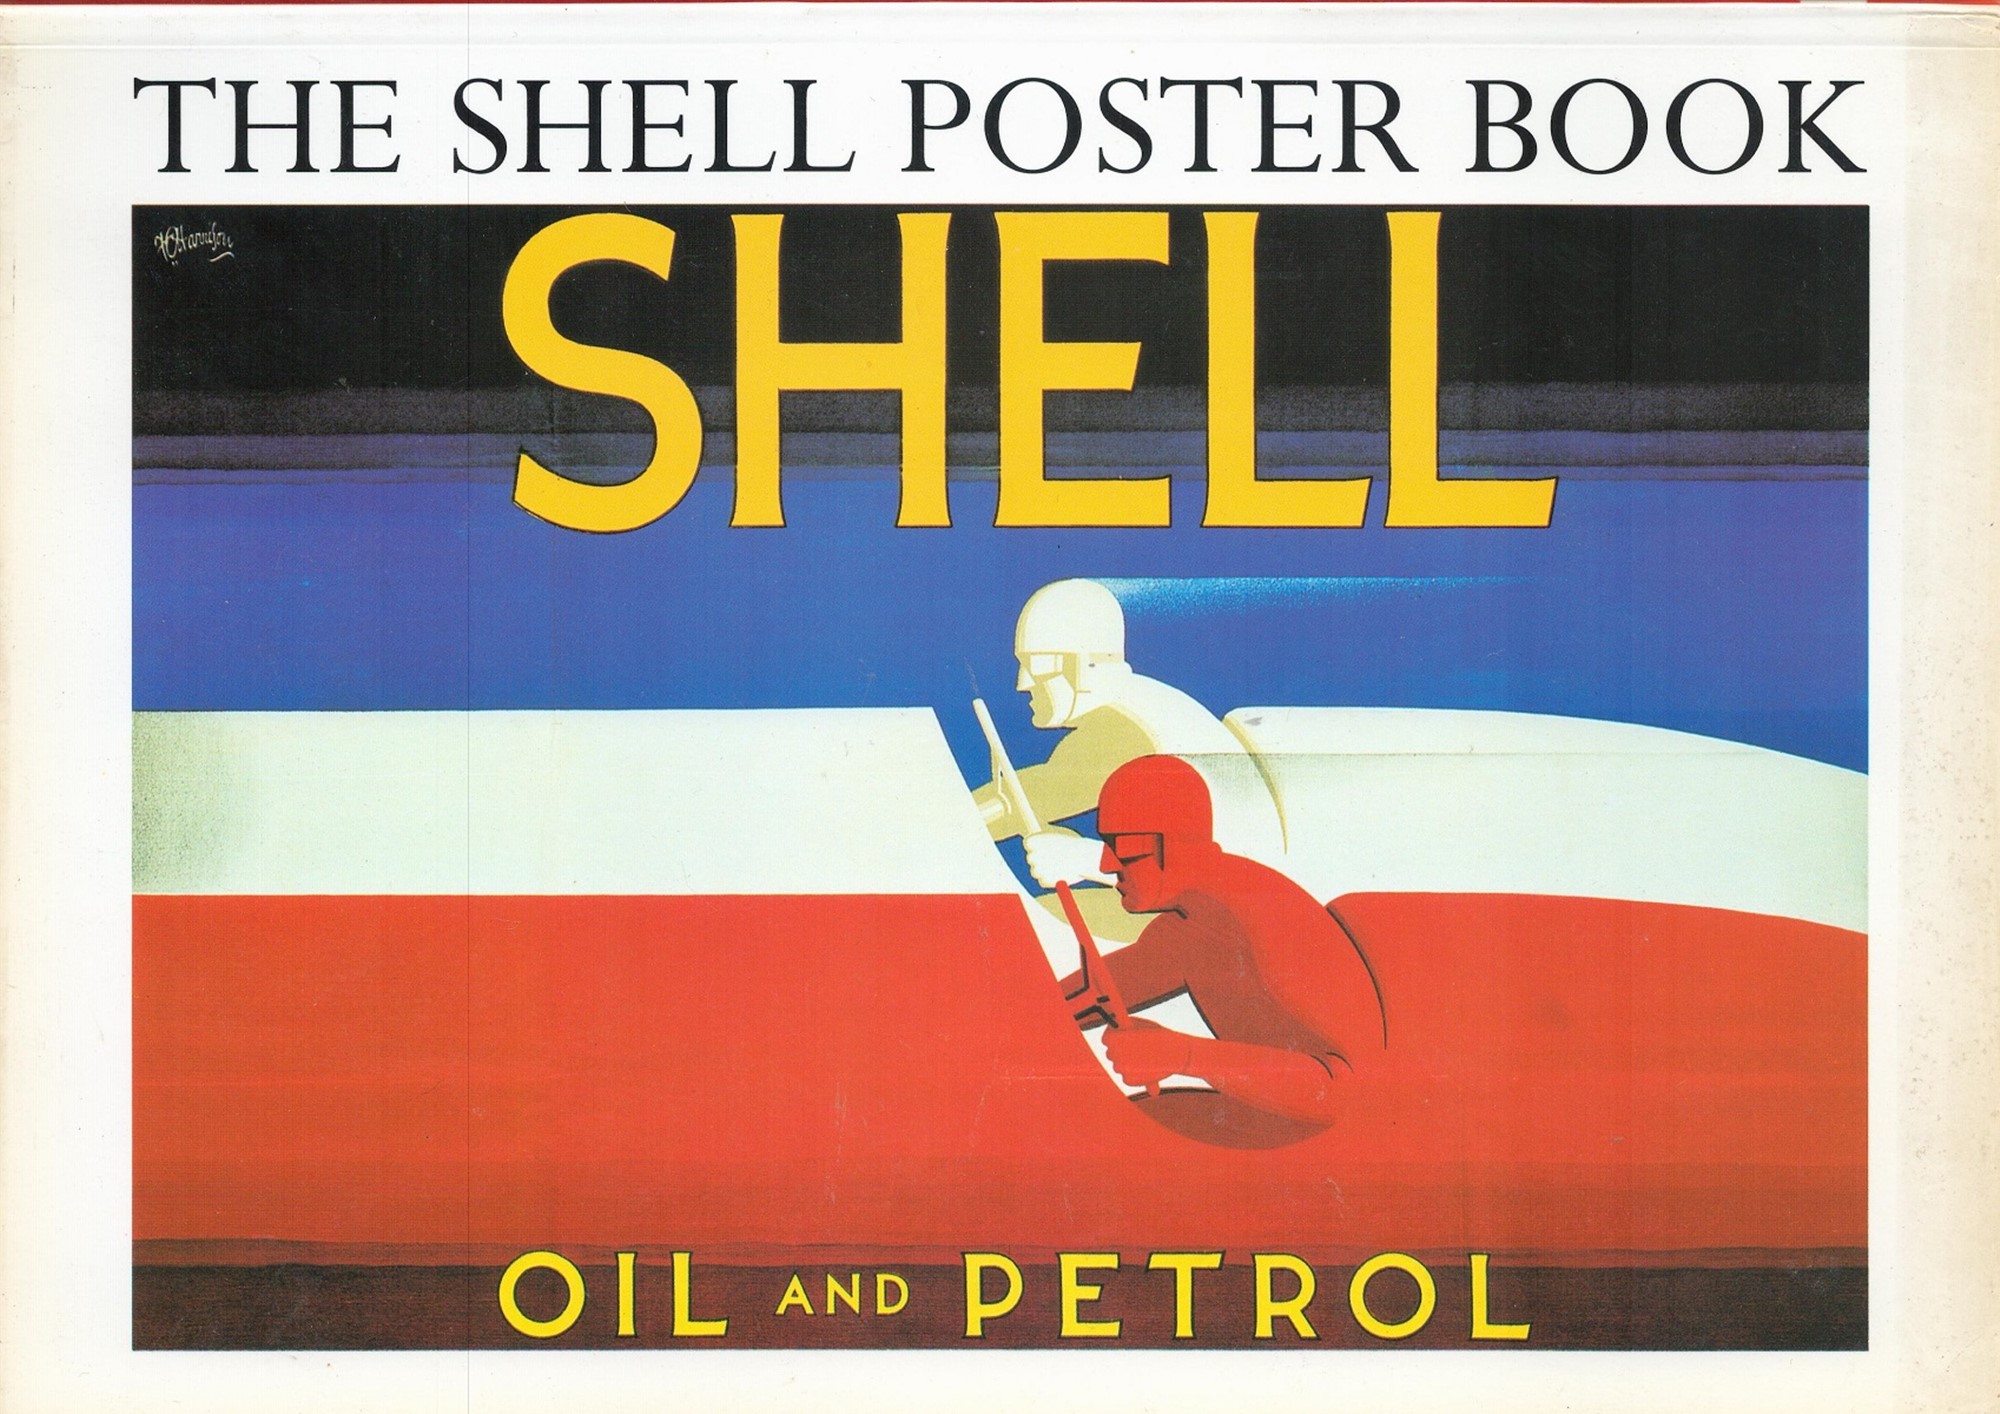 The Shell Poster Book Oil and Petrol Softback Book 1998 First Edition published by Profile Books Ltd - Image 2 of 6